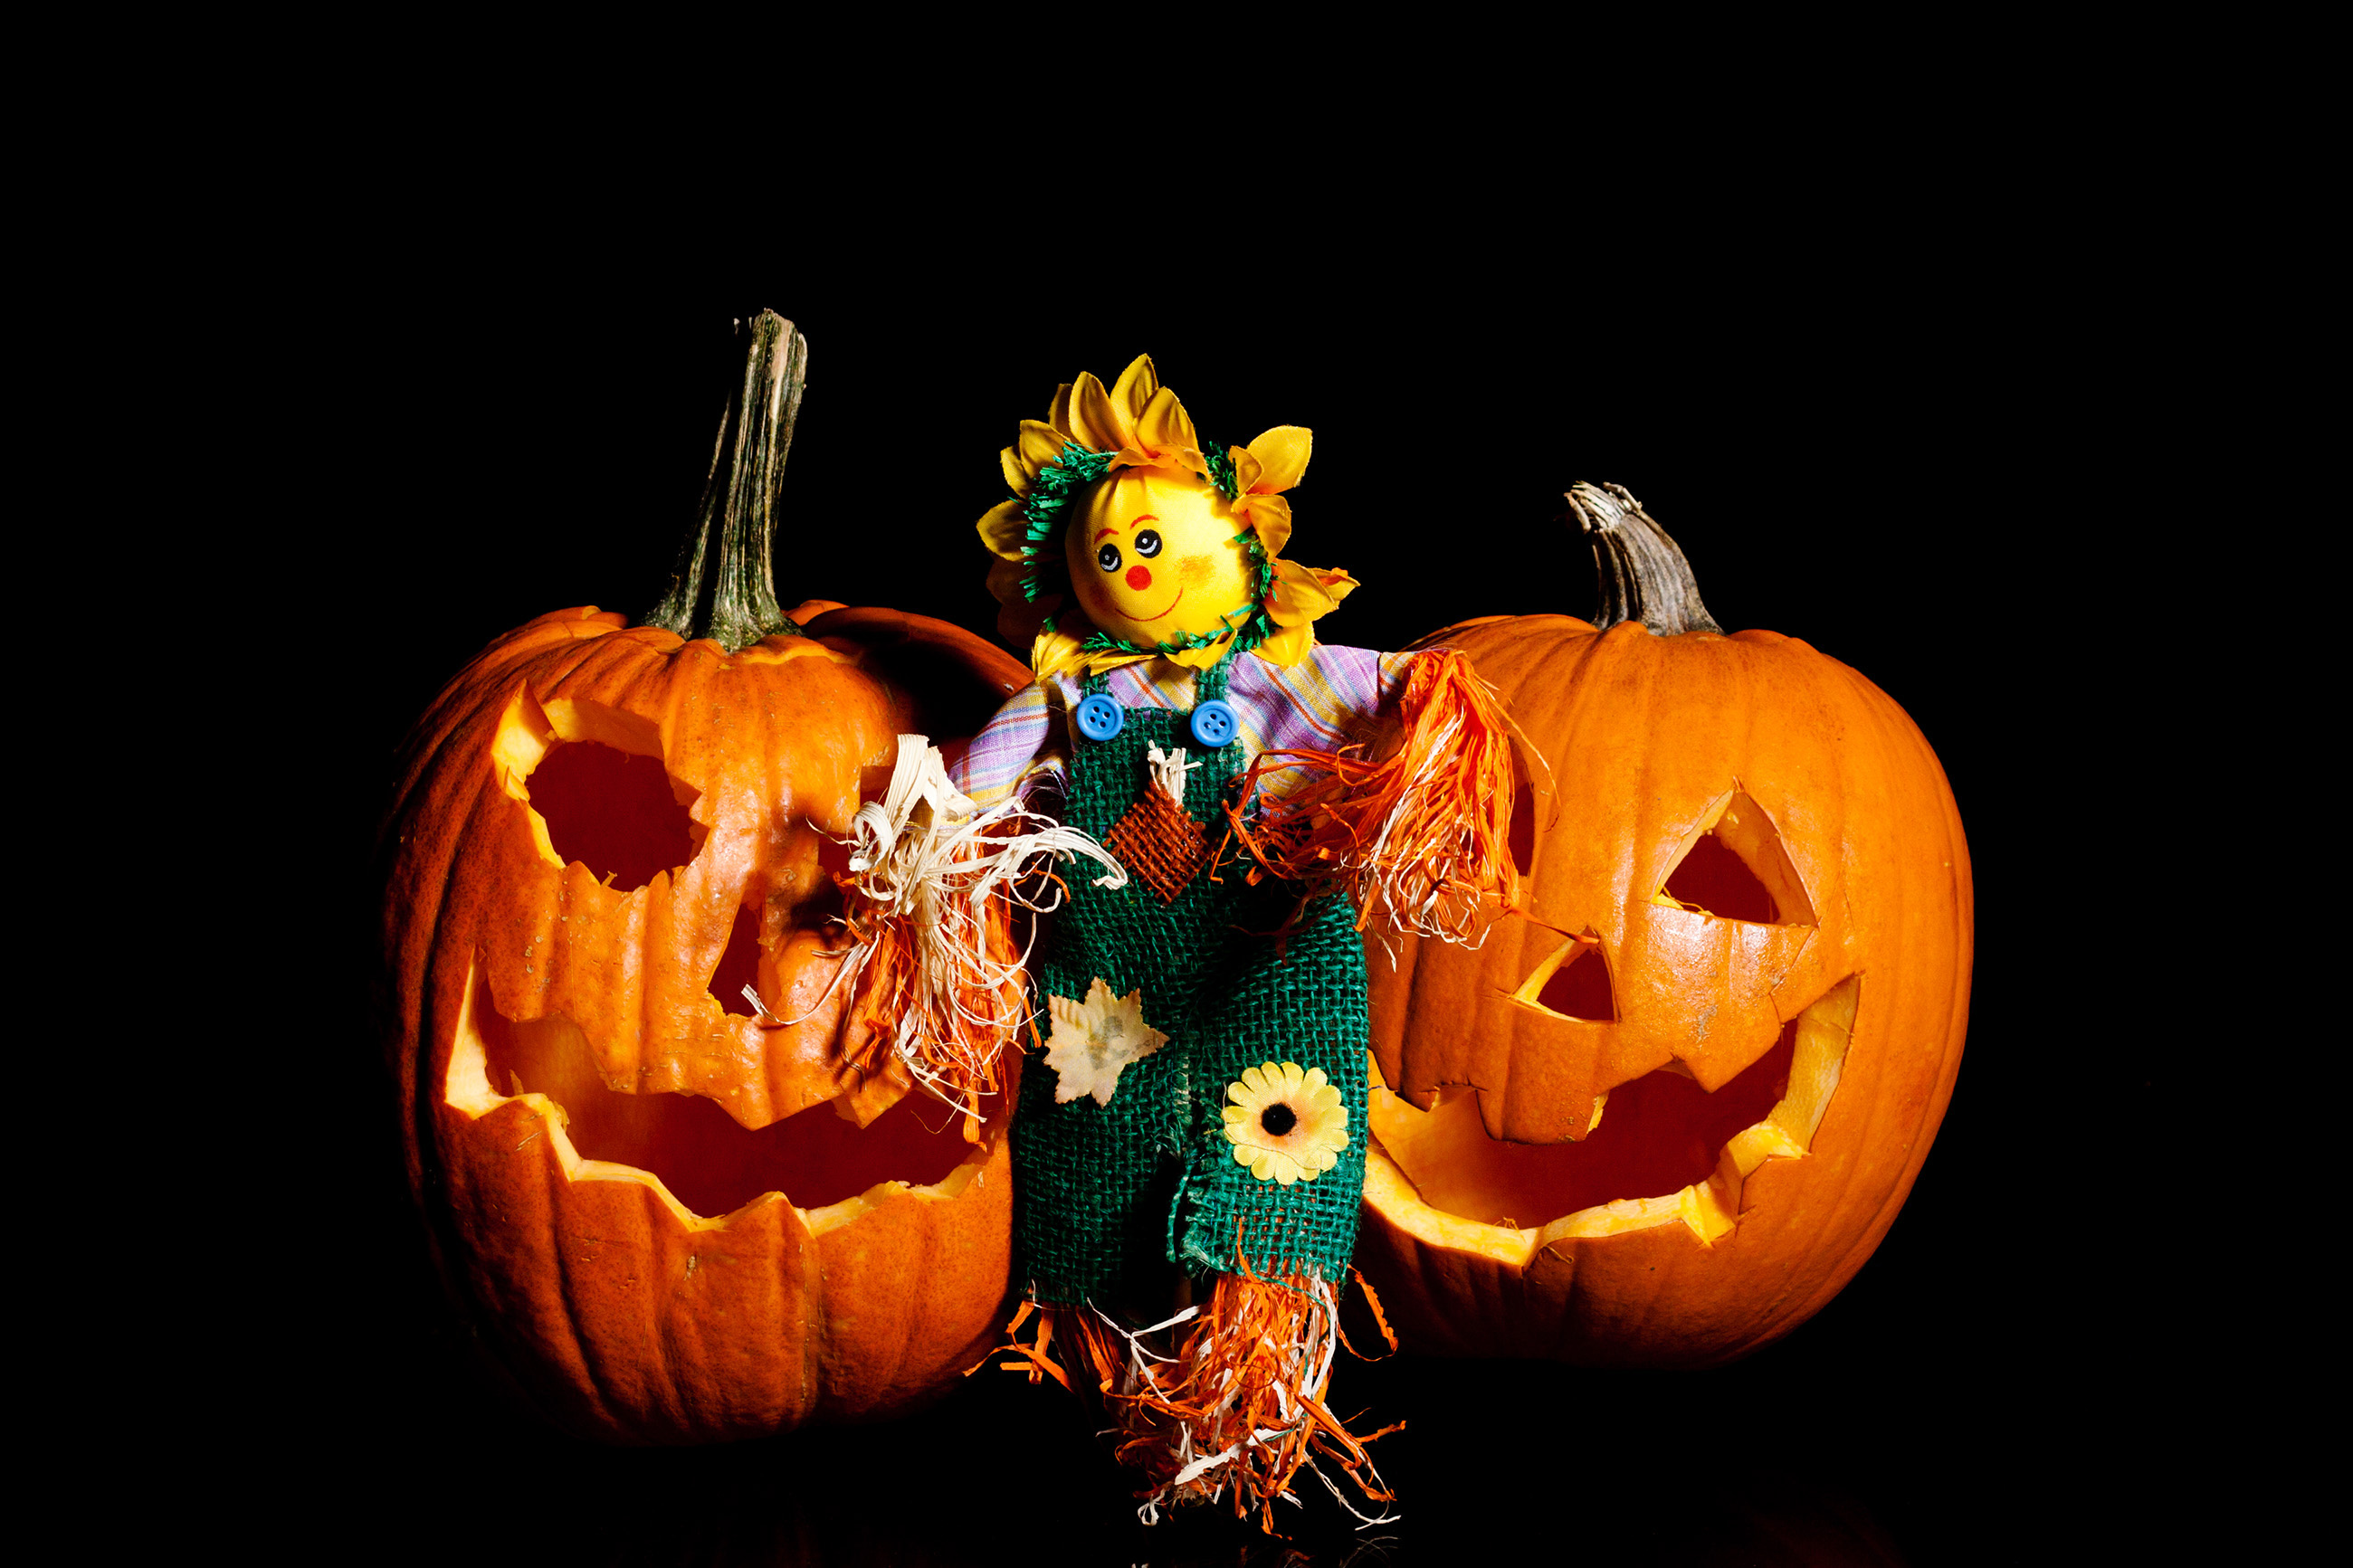 Scarecrow standing with pumpkins photo